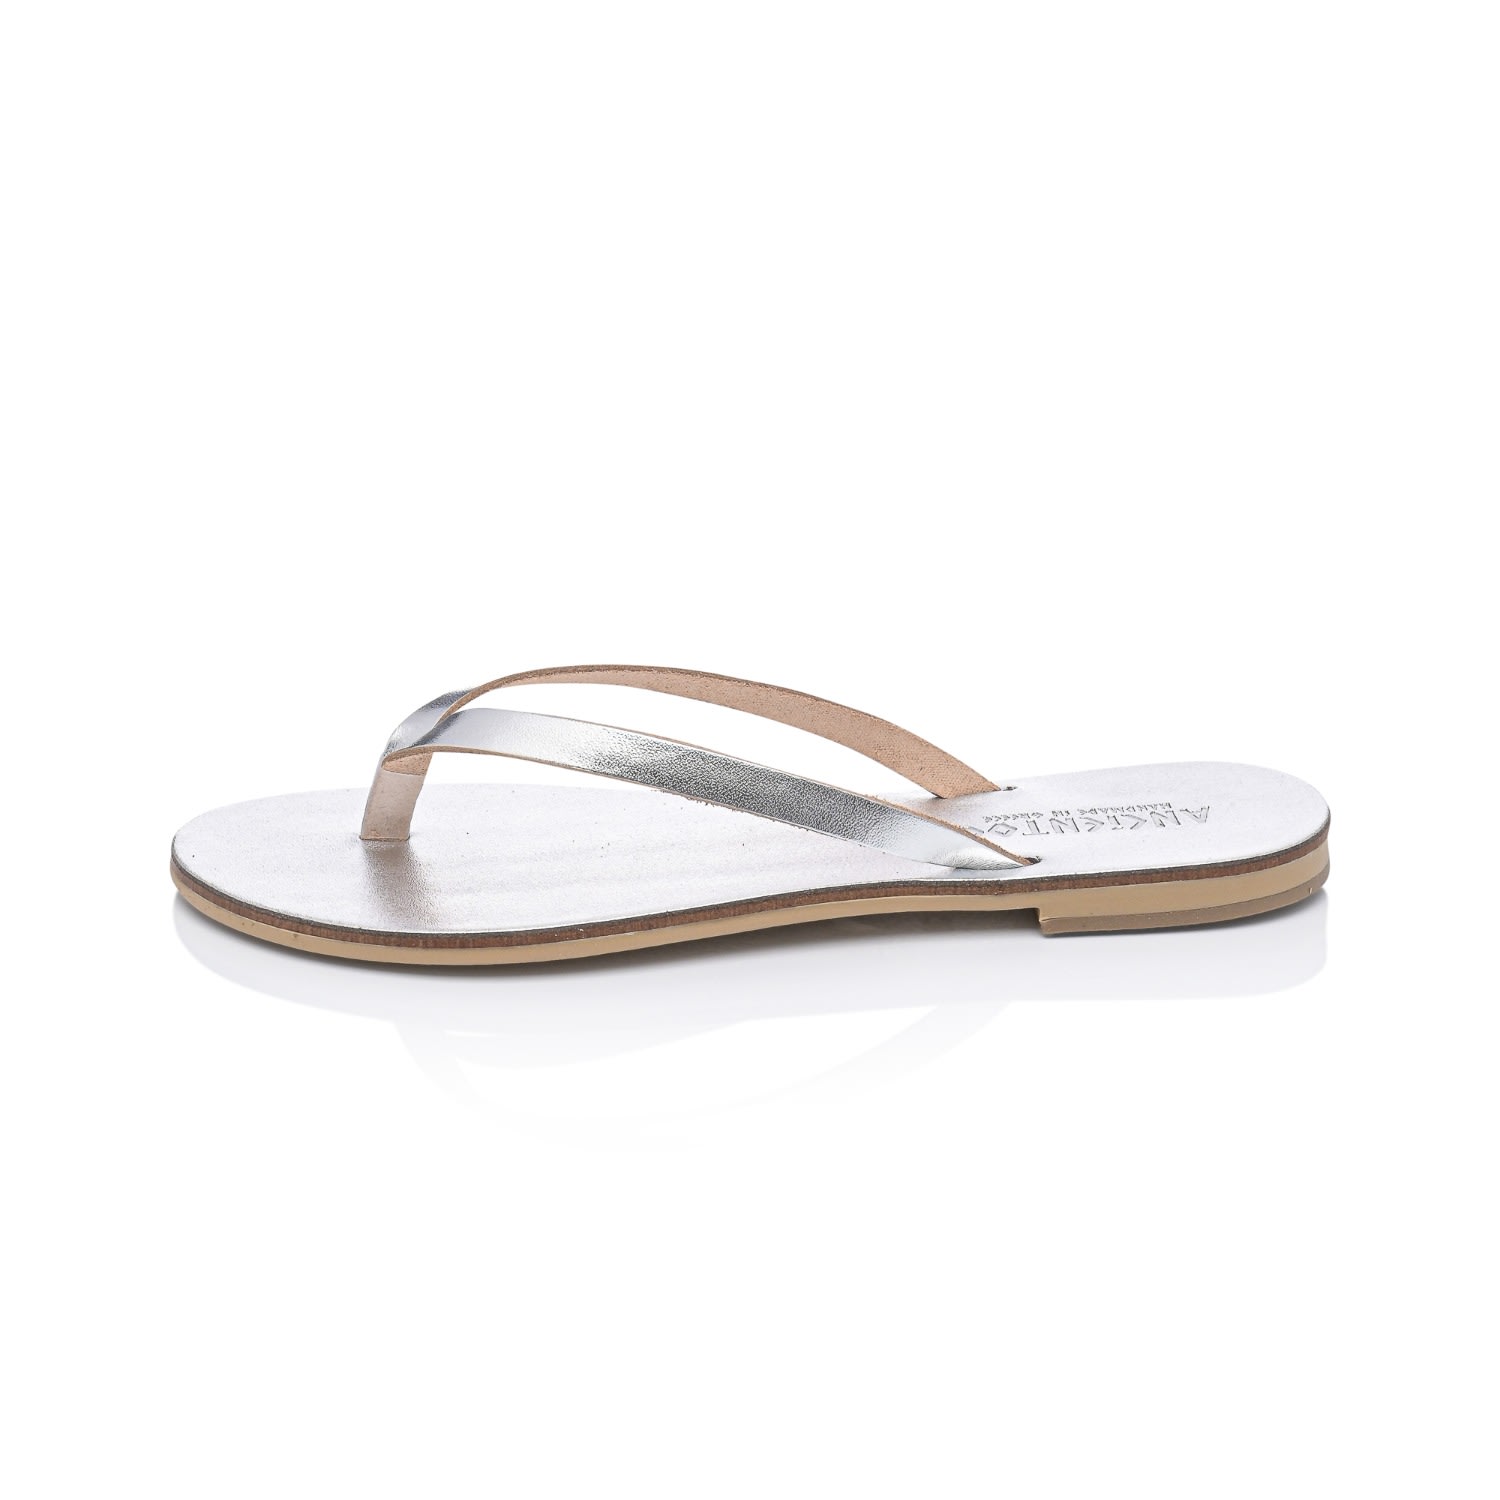 Ancientoo Achelois Silver Handcrafted Leather Flip Flop Sandal For Women In Metallic